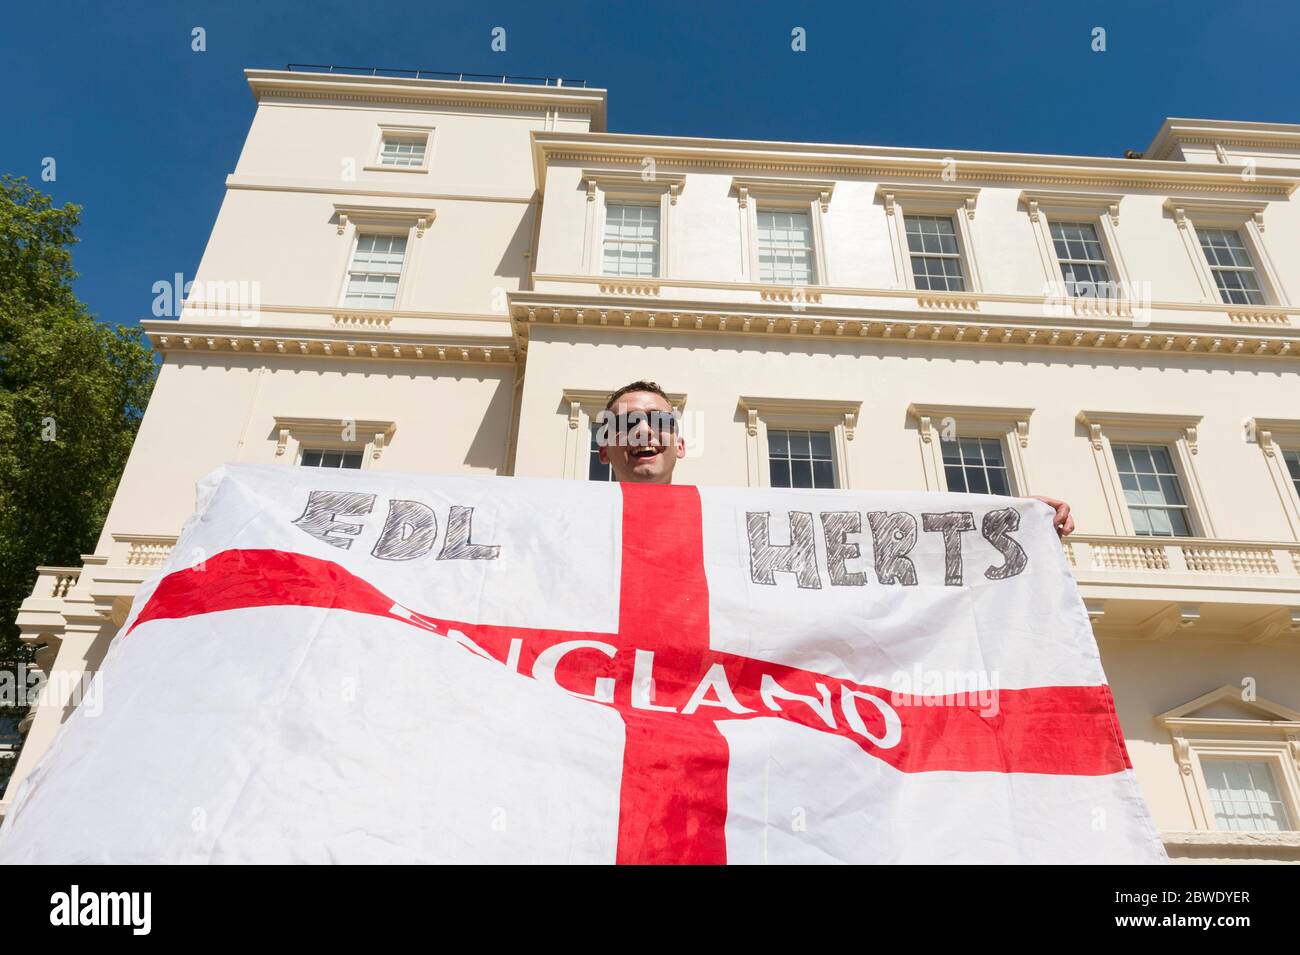 English Defence League (EDL) members on  a March organised by group calling itself 'British Citizens Against Muslim Extremists'. The protest is about Stock Photo